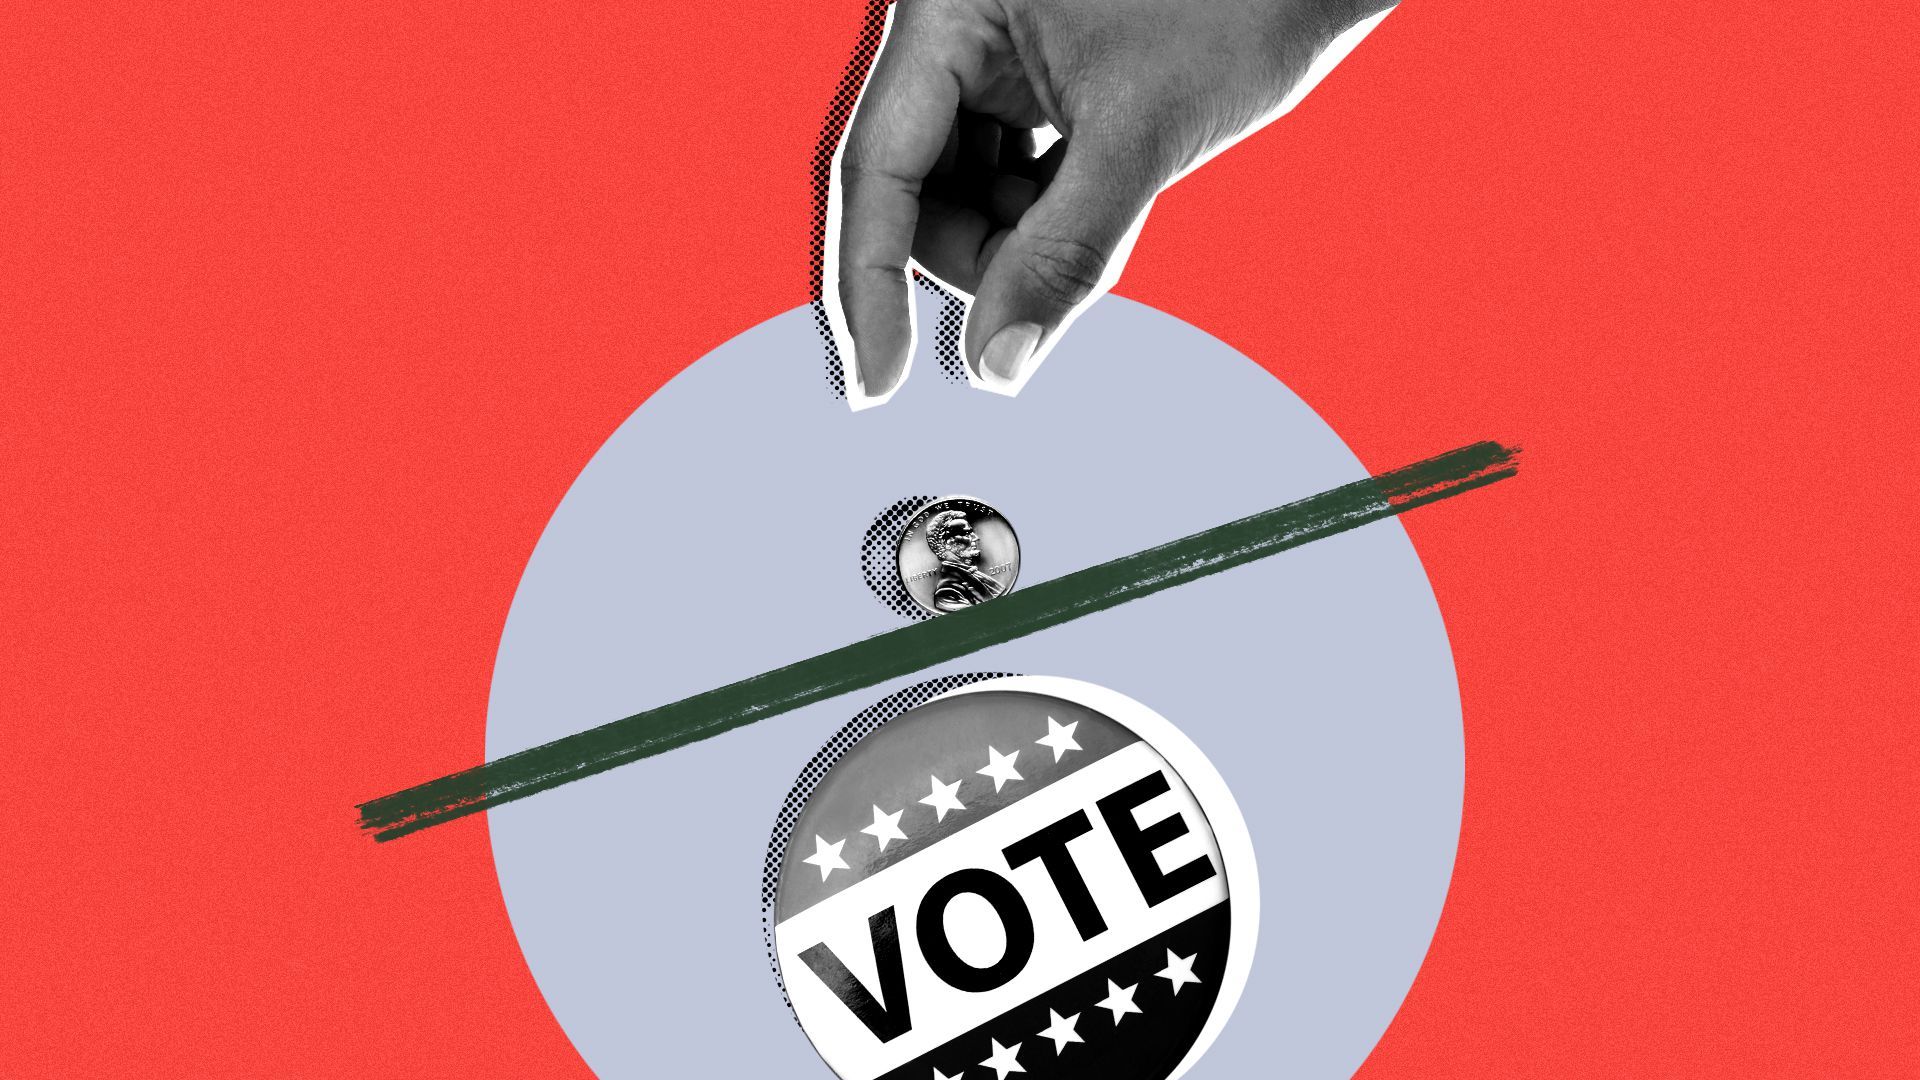 Illustration of a hand dropping a penny towards a vote pin